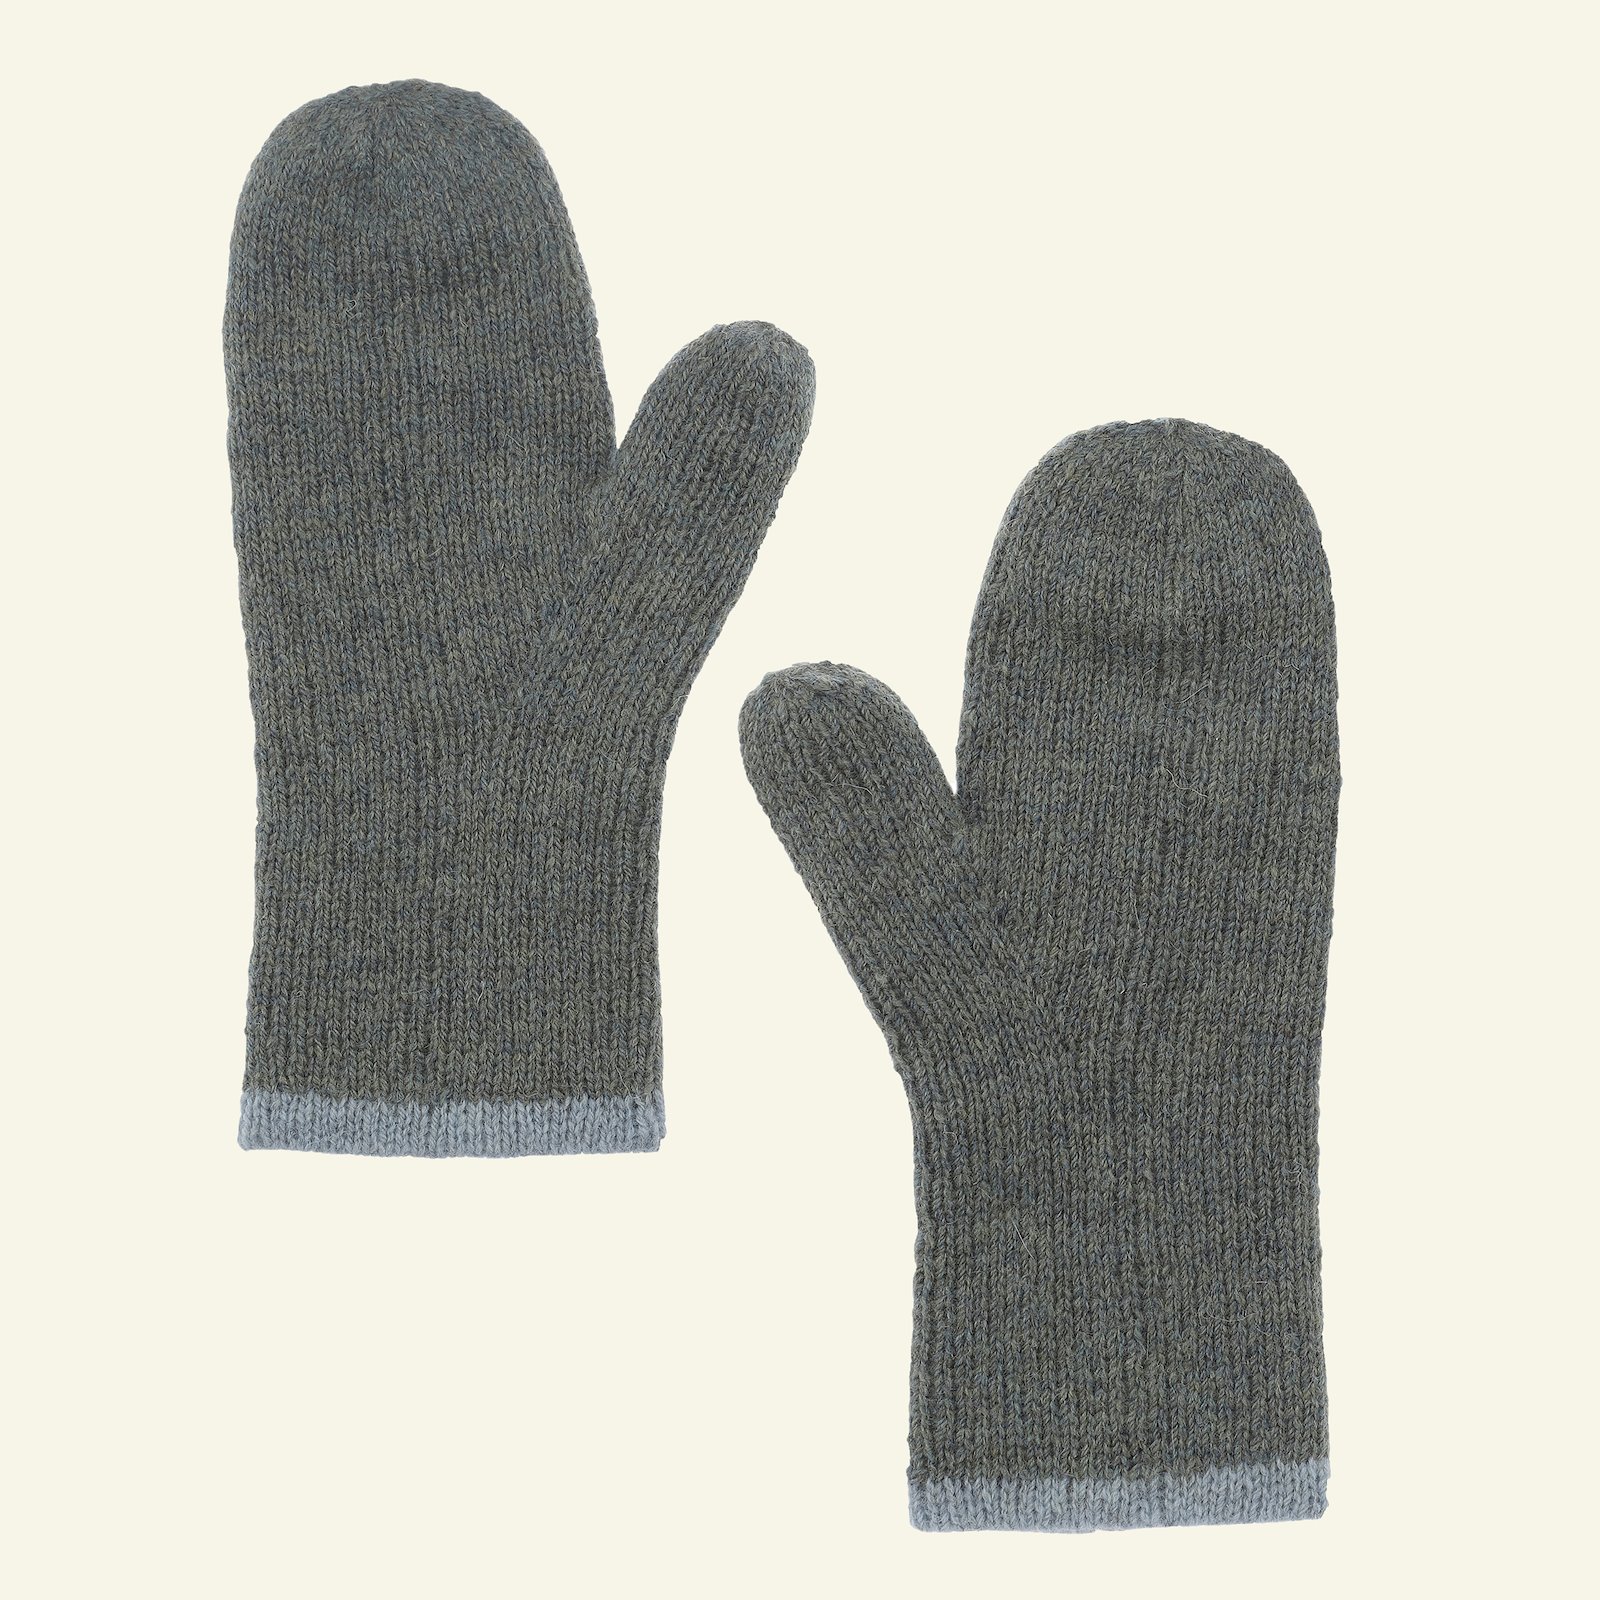 FRAYA knitting pattern - Never Cold Hands Mittens, accessories FRAYA3008_2.png